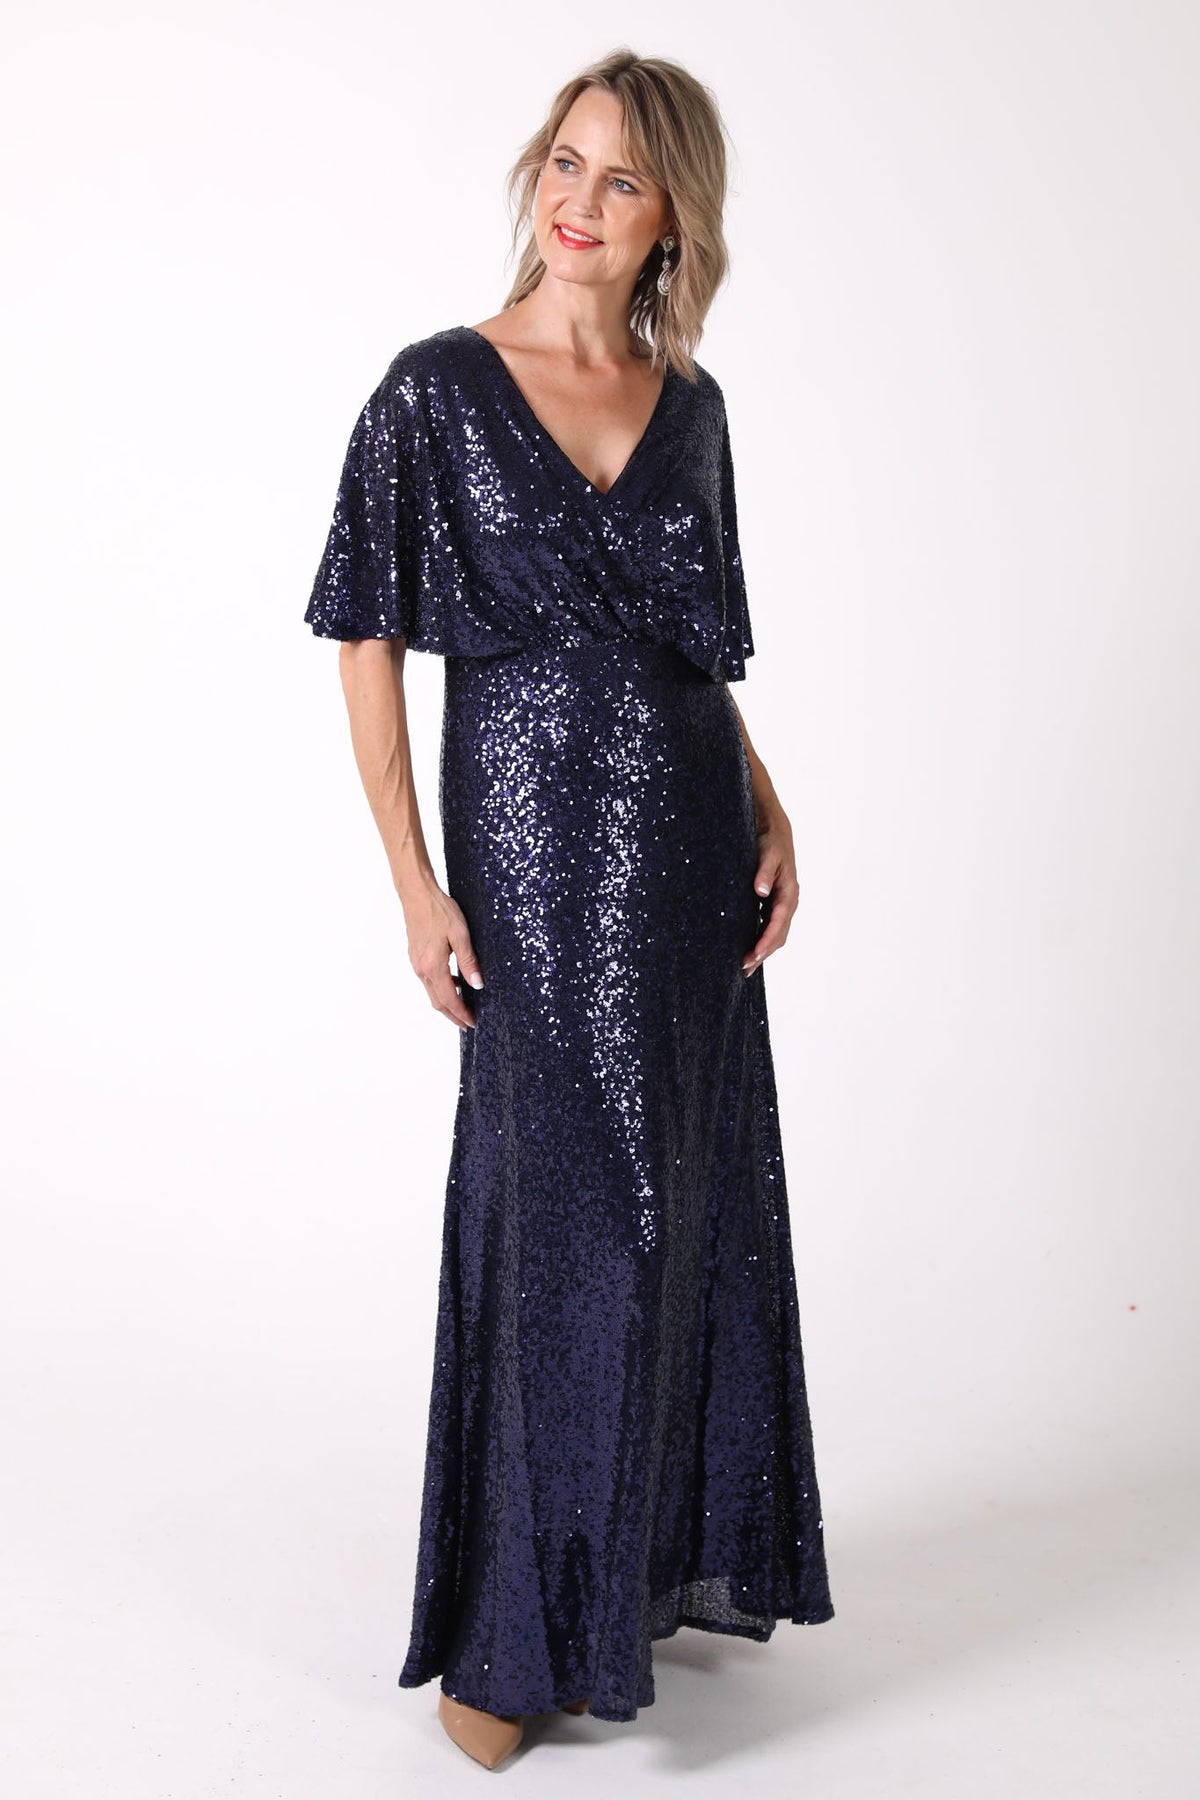 Mature woman sequin maxi dress with V neckline, butterfly sleeves in navy